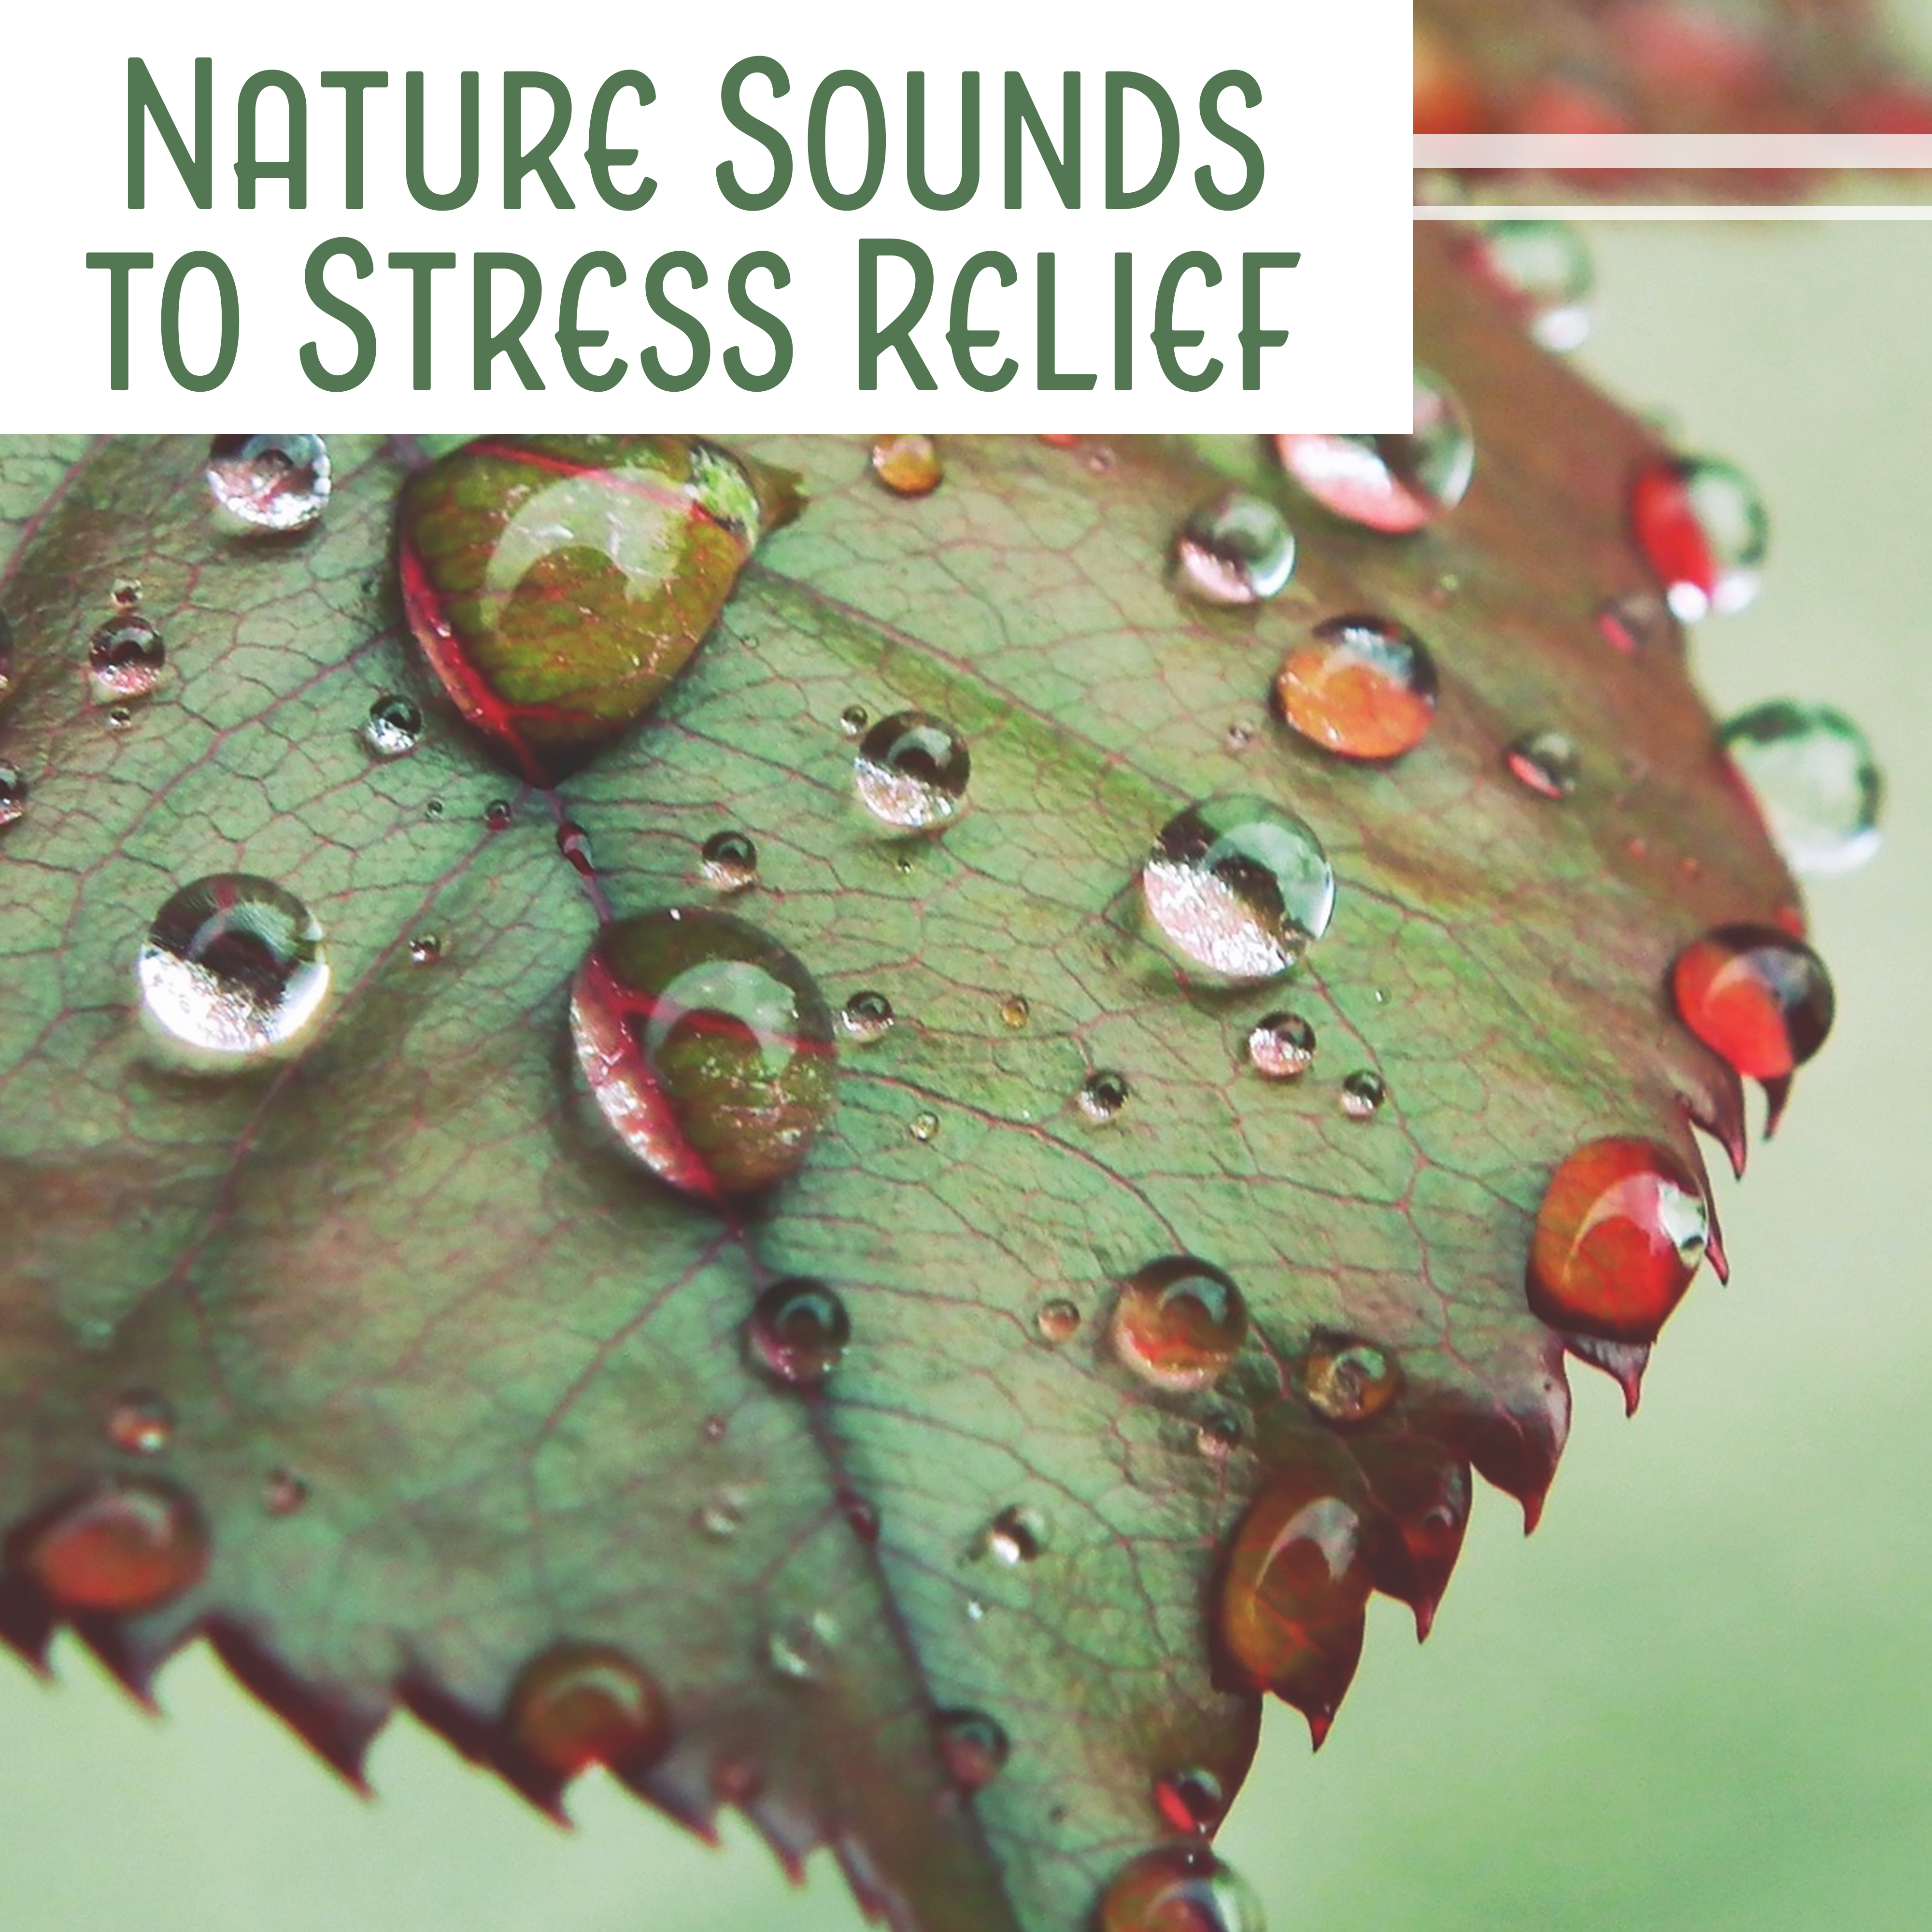 Nature Sounds to Stress Relief – Noise of Nature, Mind Calmness, Rest in Home, House Relaxation